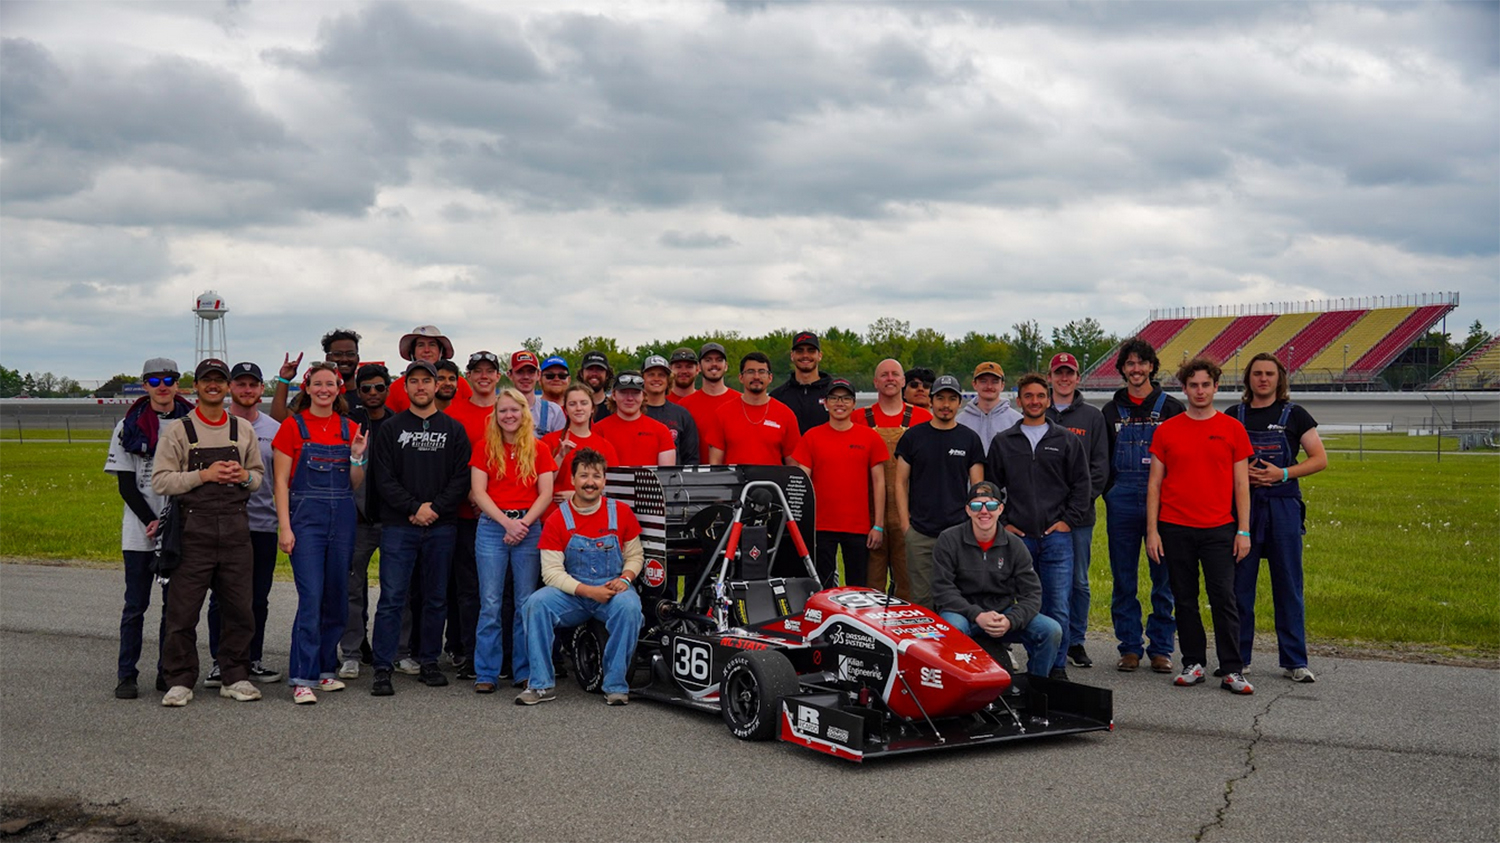 The Formula SAE team poses at a racetrack with the car they built.